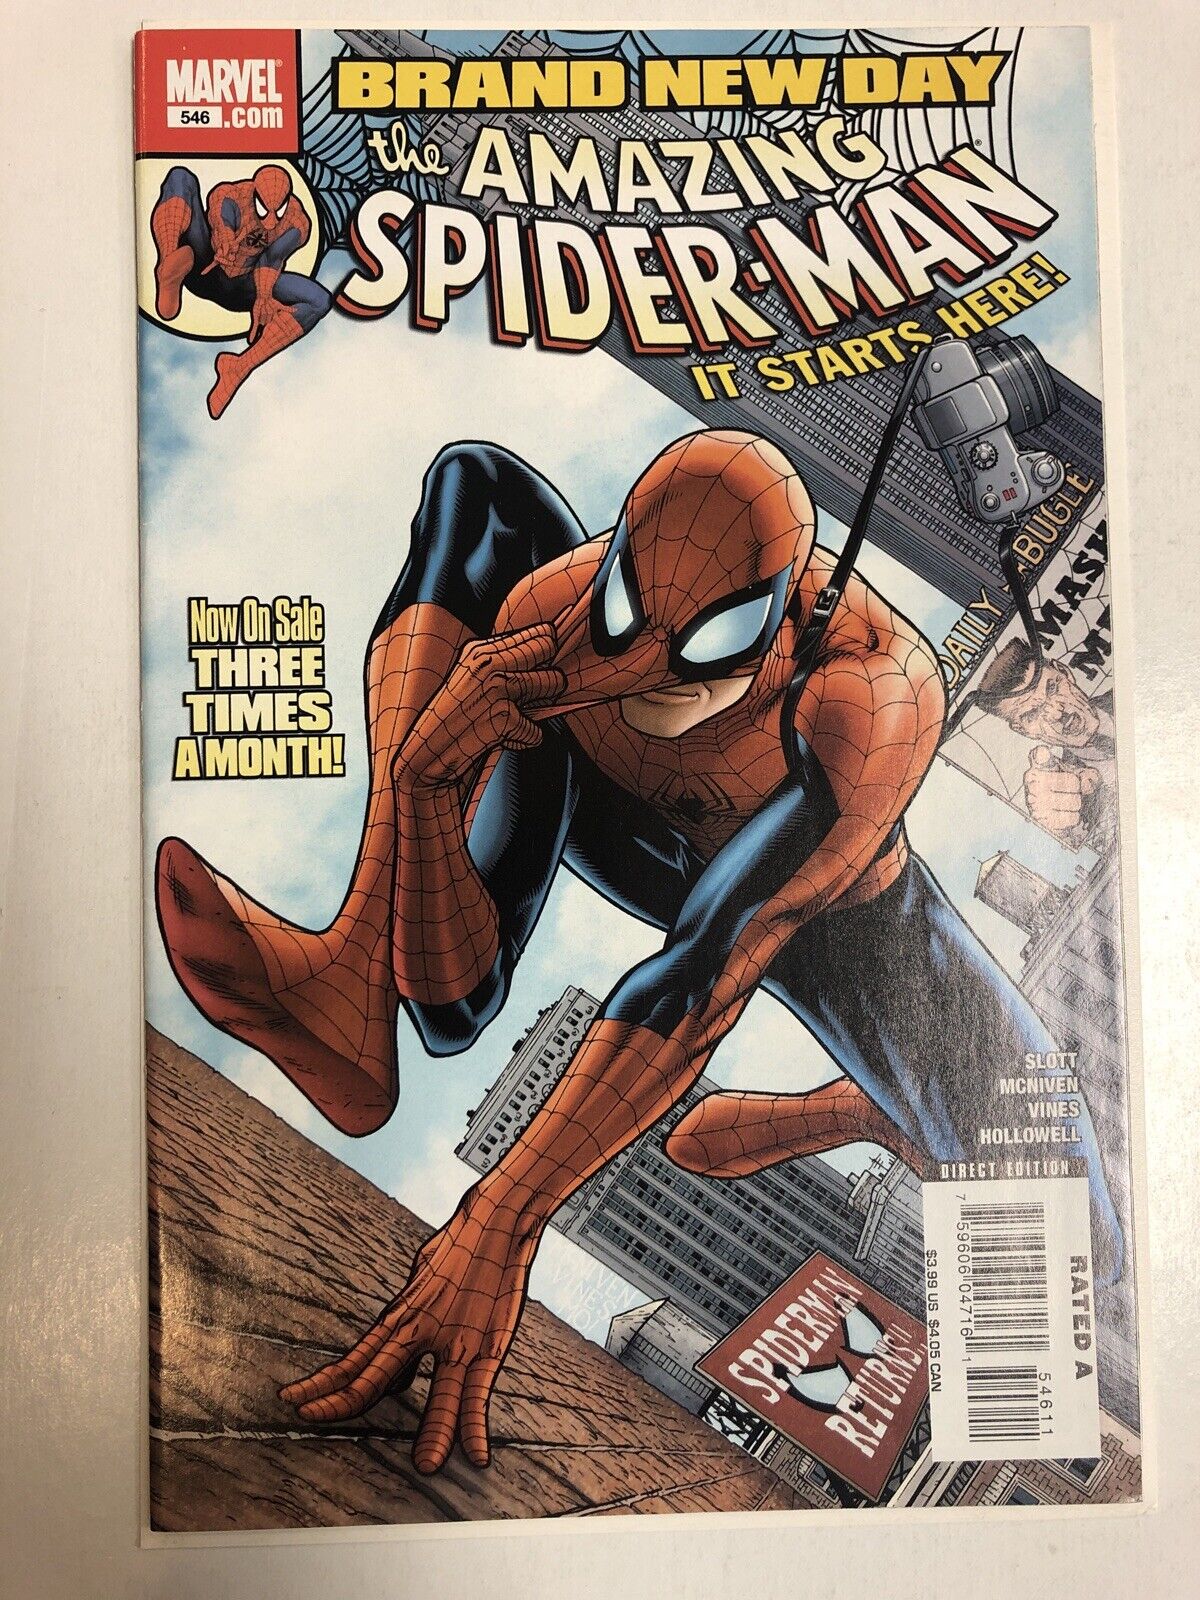 Amazing Spider-Man (2008) # 546 (NM) 1st Full Jackpot Mr Negative One More Day